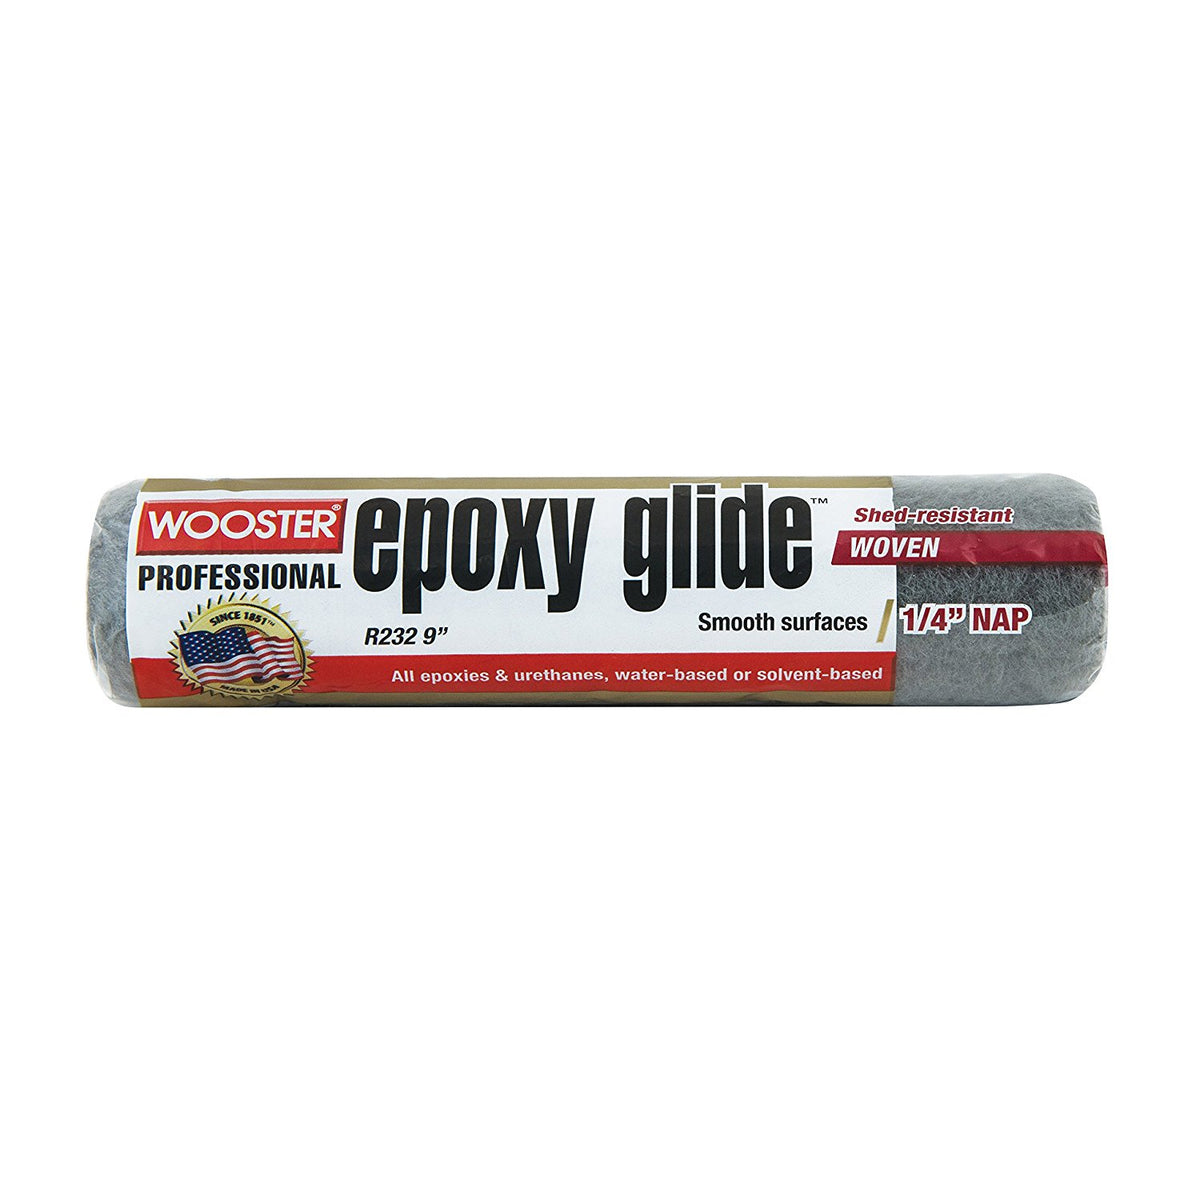 Wooster R232-9 Epoxy Glide Roller Cover, Smooth, 1/4" Nap x 9"